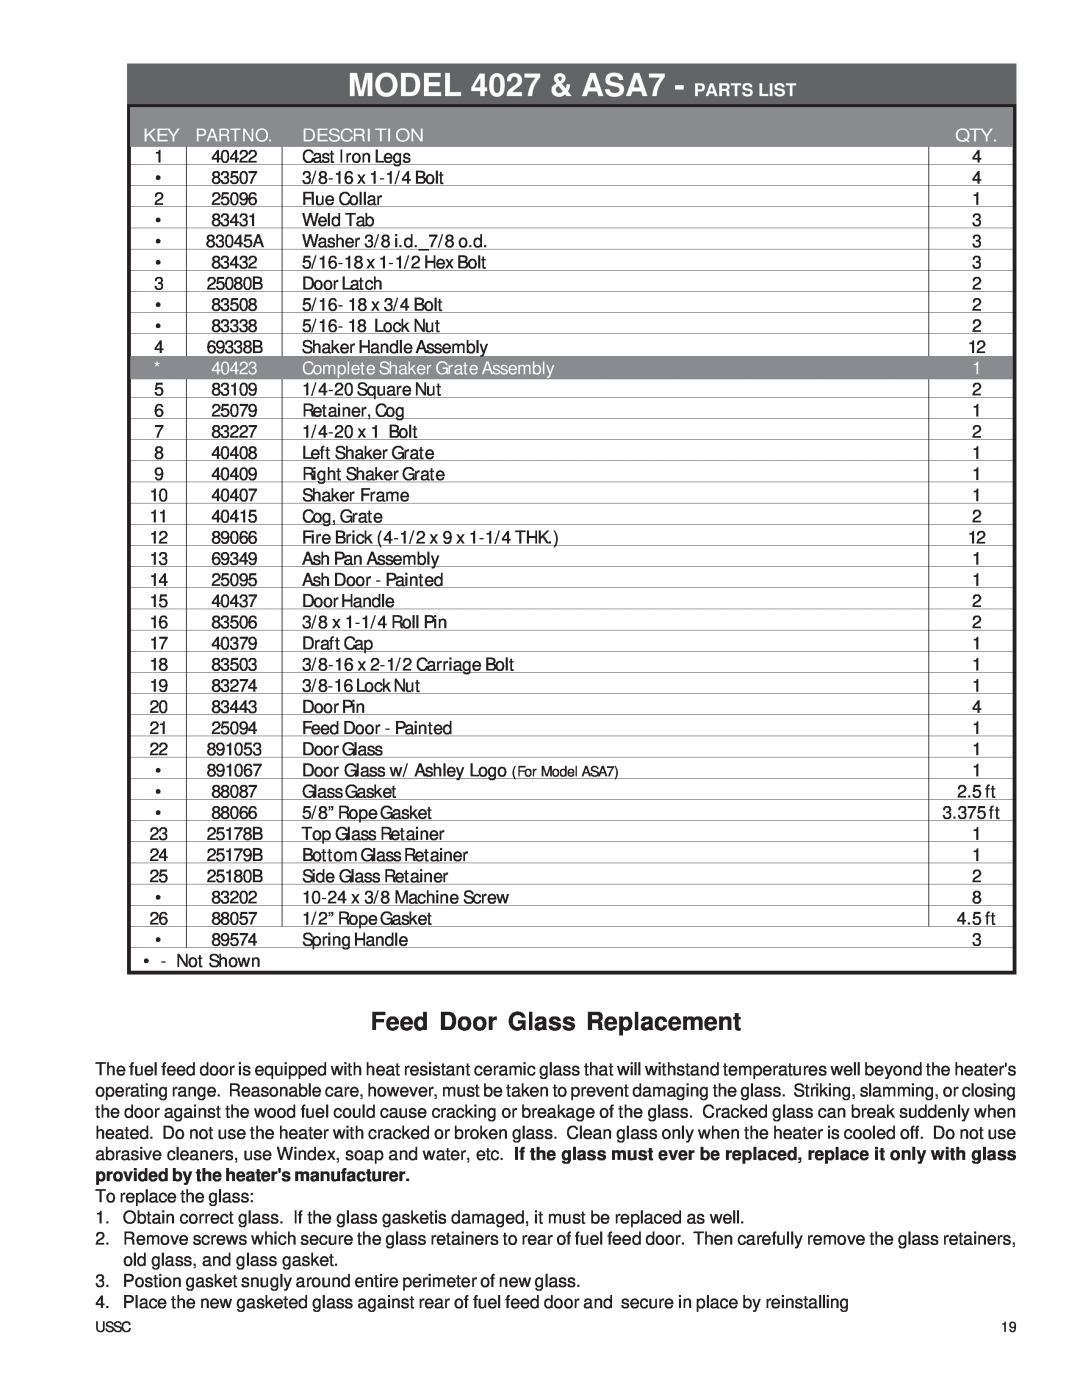 United States Stove owner manual Feed Door Glass Replacement, MODEL 4027 & ASA7 - PARTS LIST, Partno, Descrition, 40422 